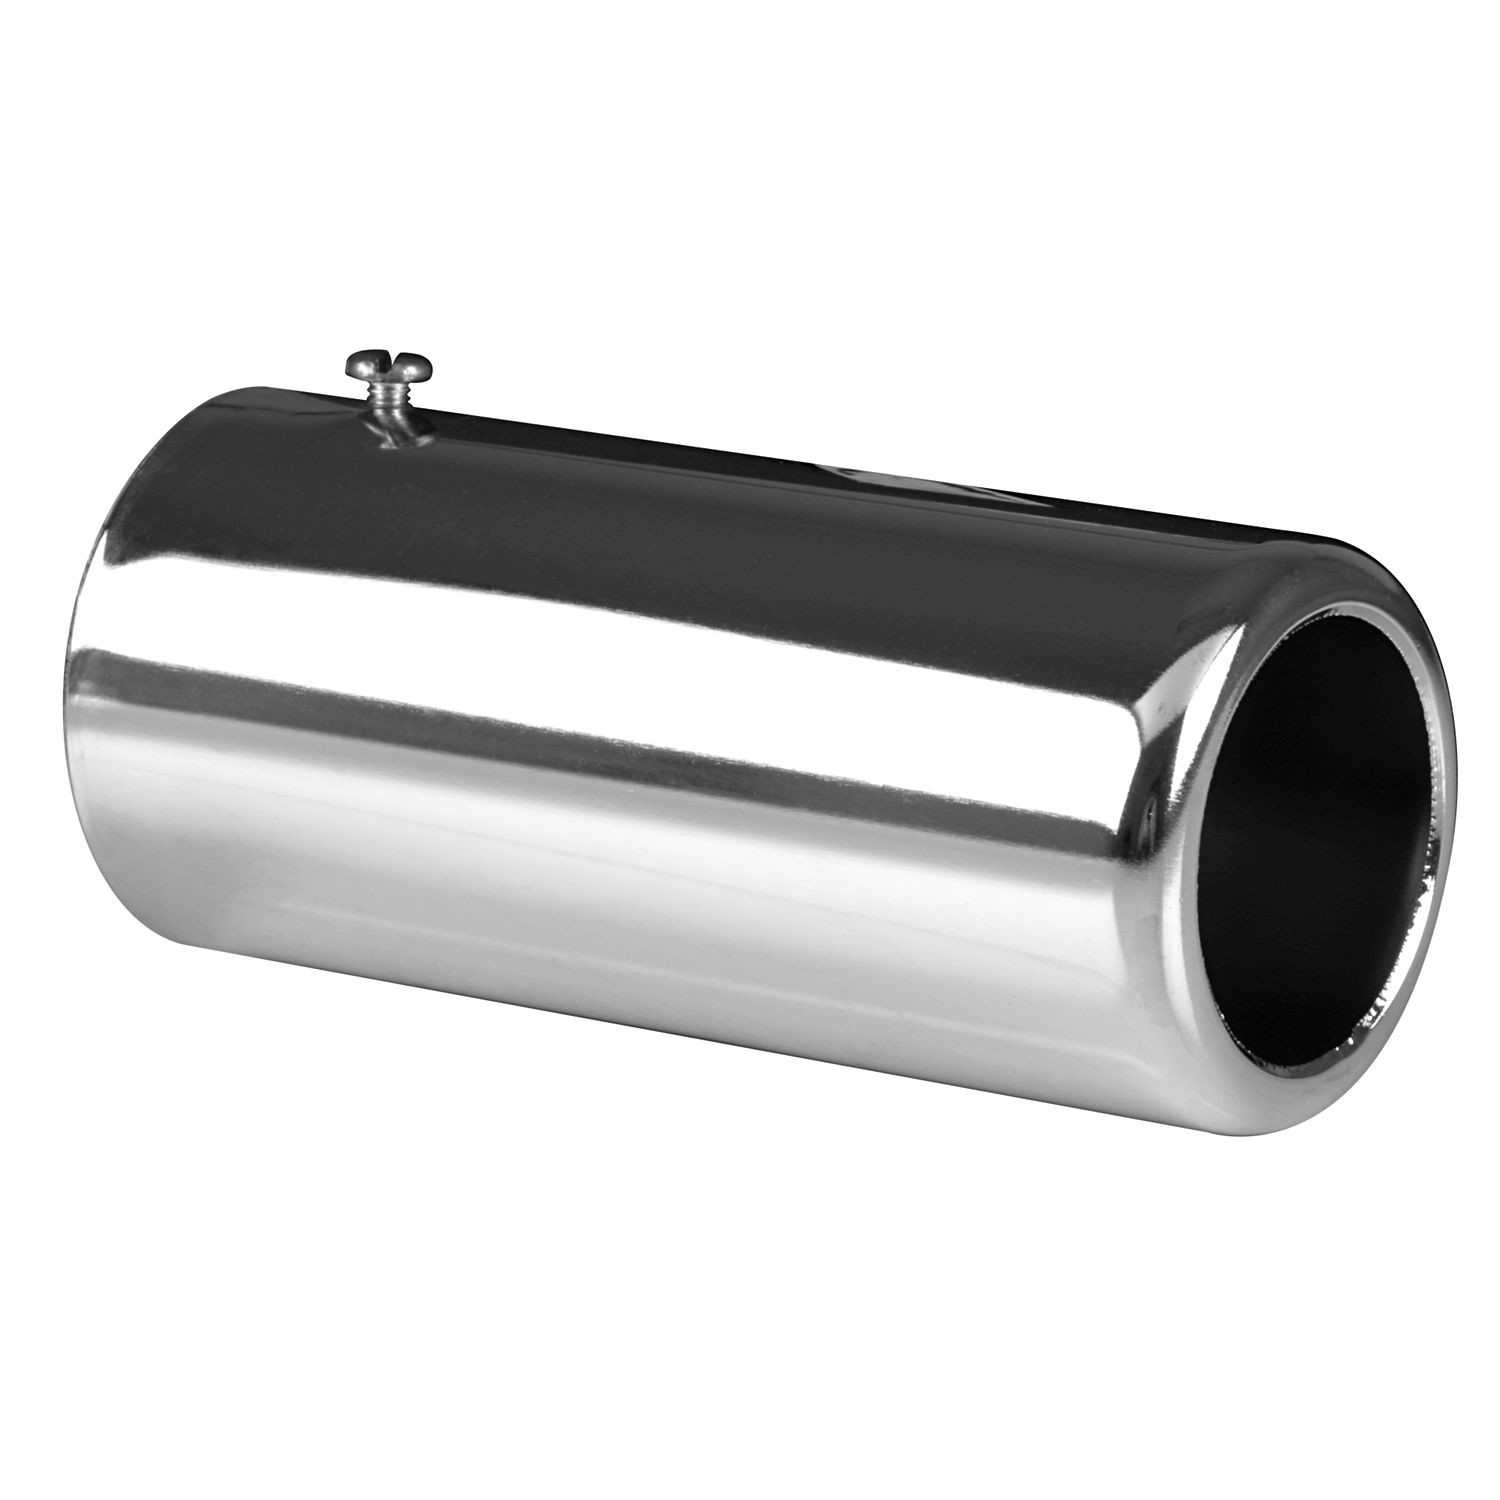 AP EXHAUST W/O FEDERAL CONVERTER - Exhaust Tail Pipe Tip - APK 9820